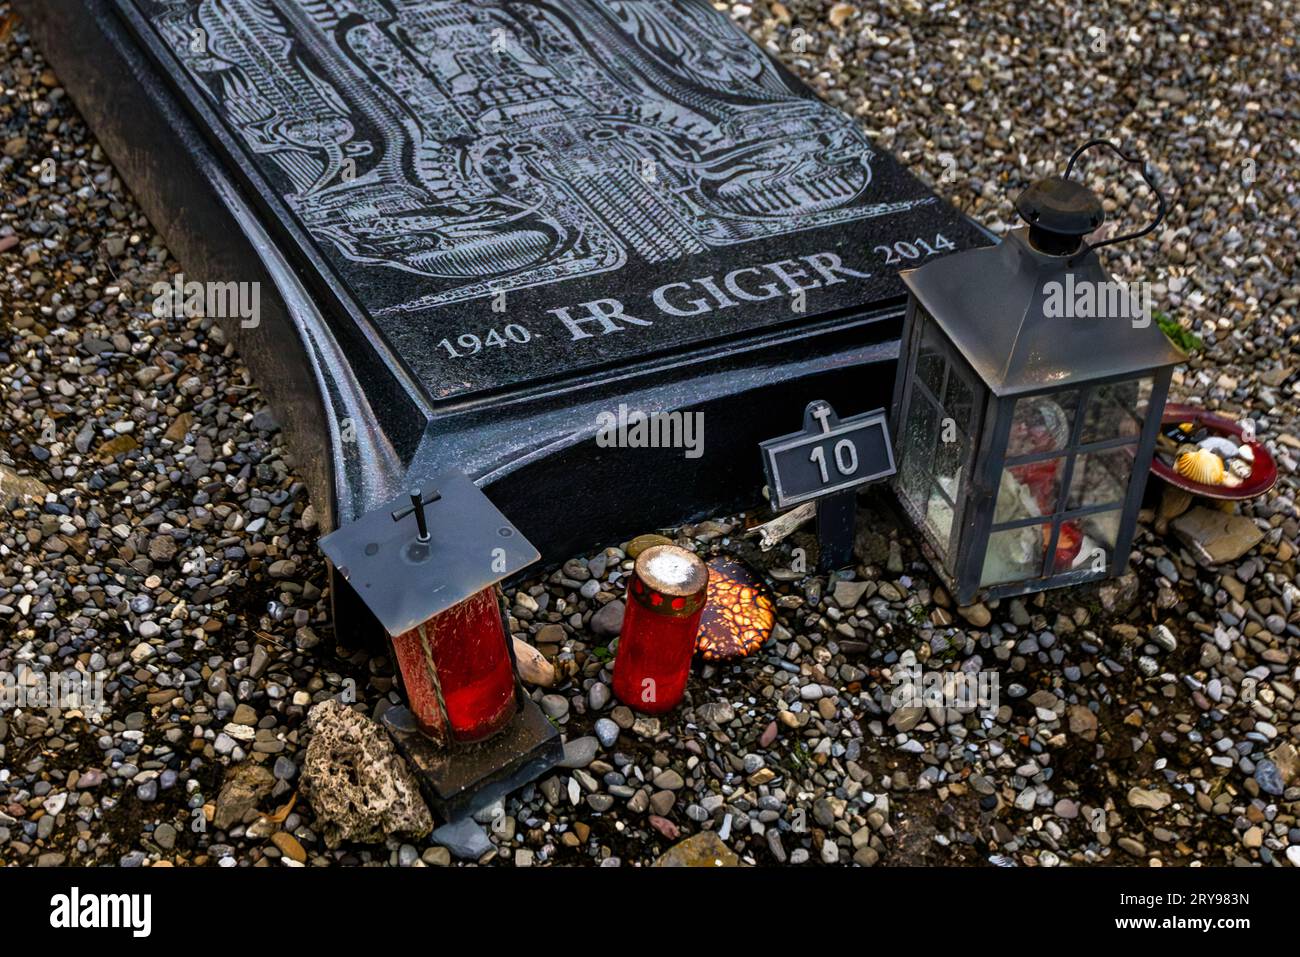 HR Giger gravestone, 1940 to 2014 in the Gruyères cemetery. The black granite stone bears a motif from the series Biomechanoid, Biomechanical Matrix. Tombstone of the artist (awarded an Oscar for the film Alien) Hans-Ruedi Giger in the cemetery of Gruyères. Épagny, Switzerland Stock Photo